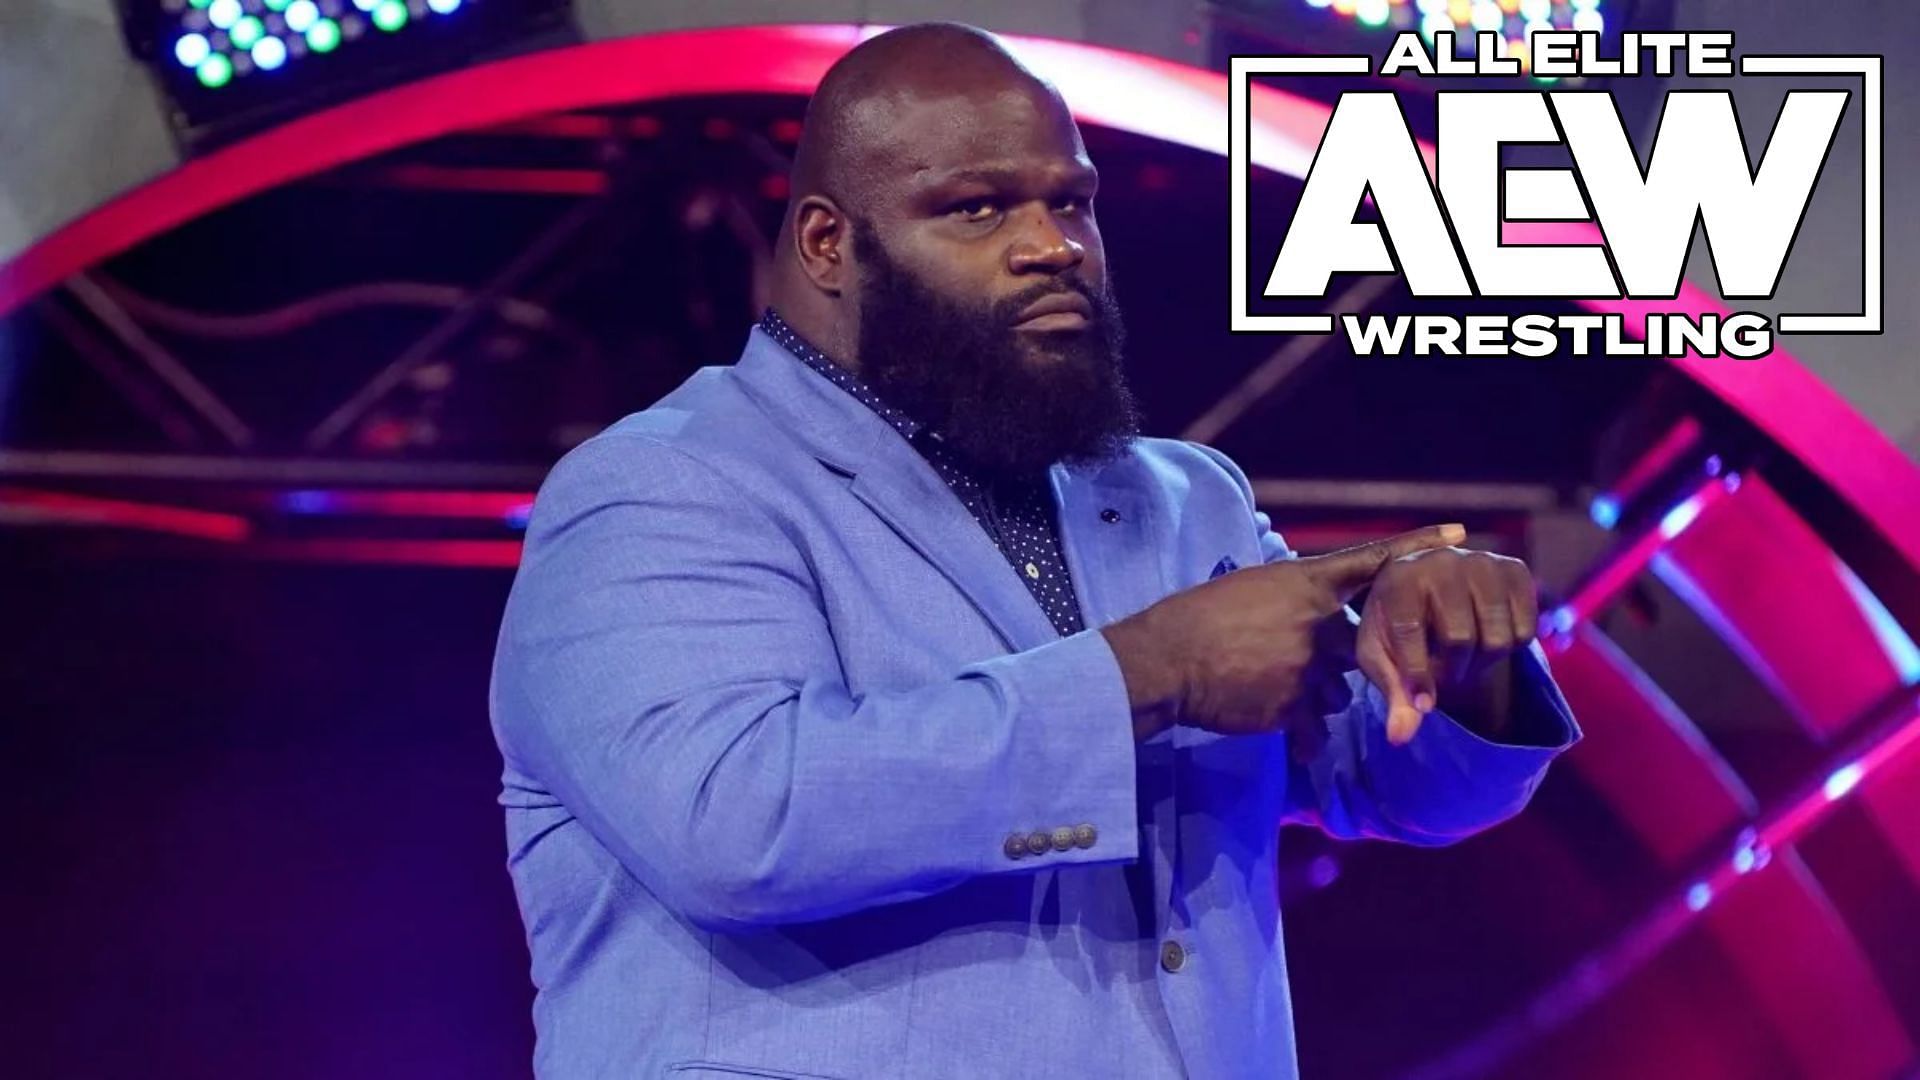 Mark Henry seems to have set the record straight on this star